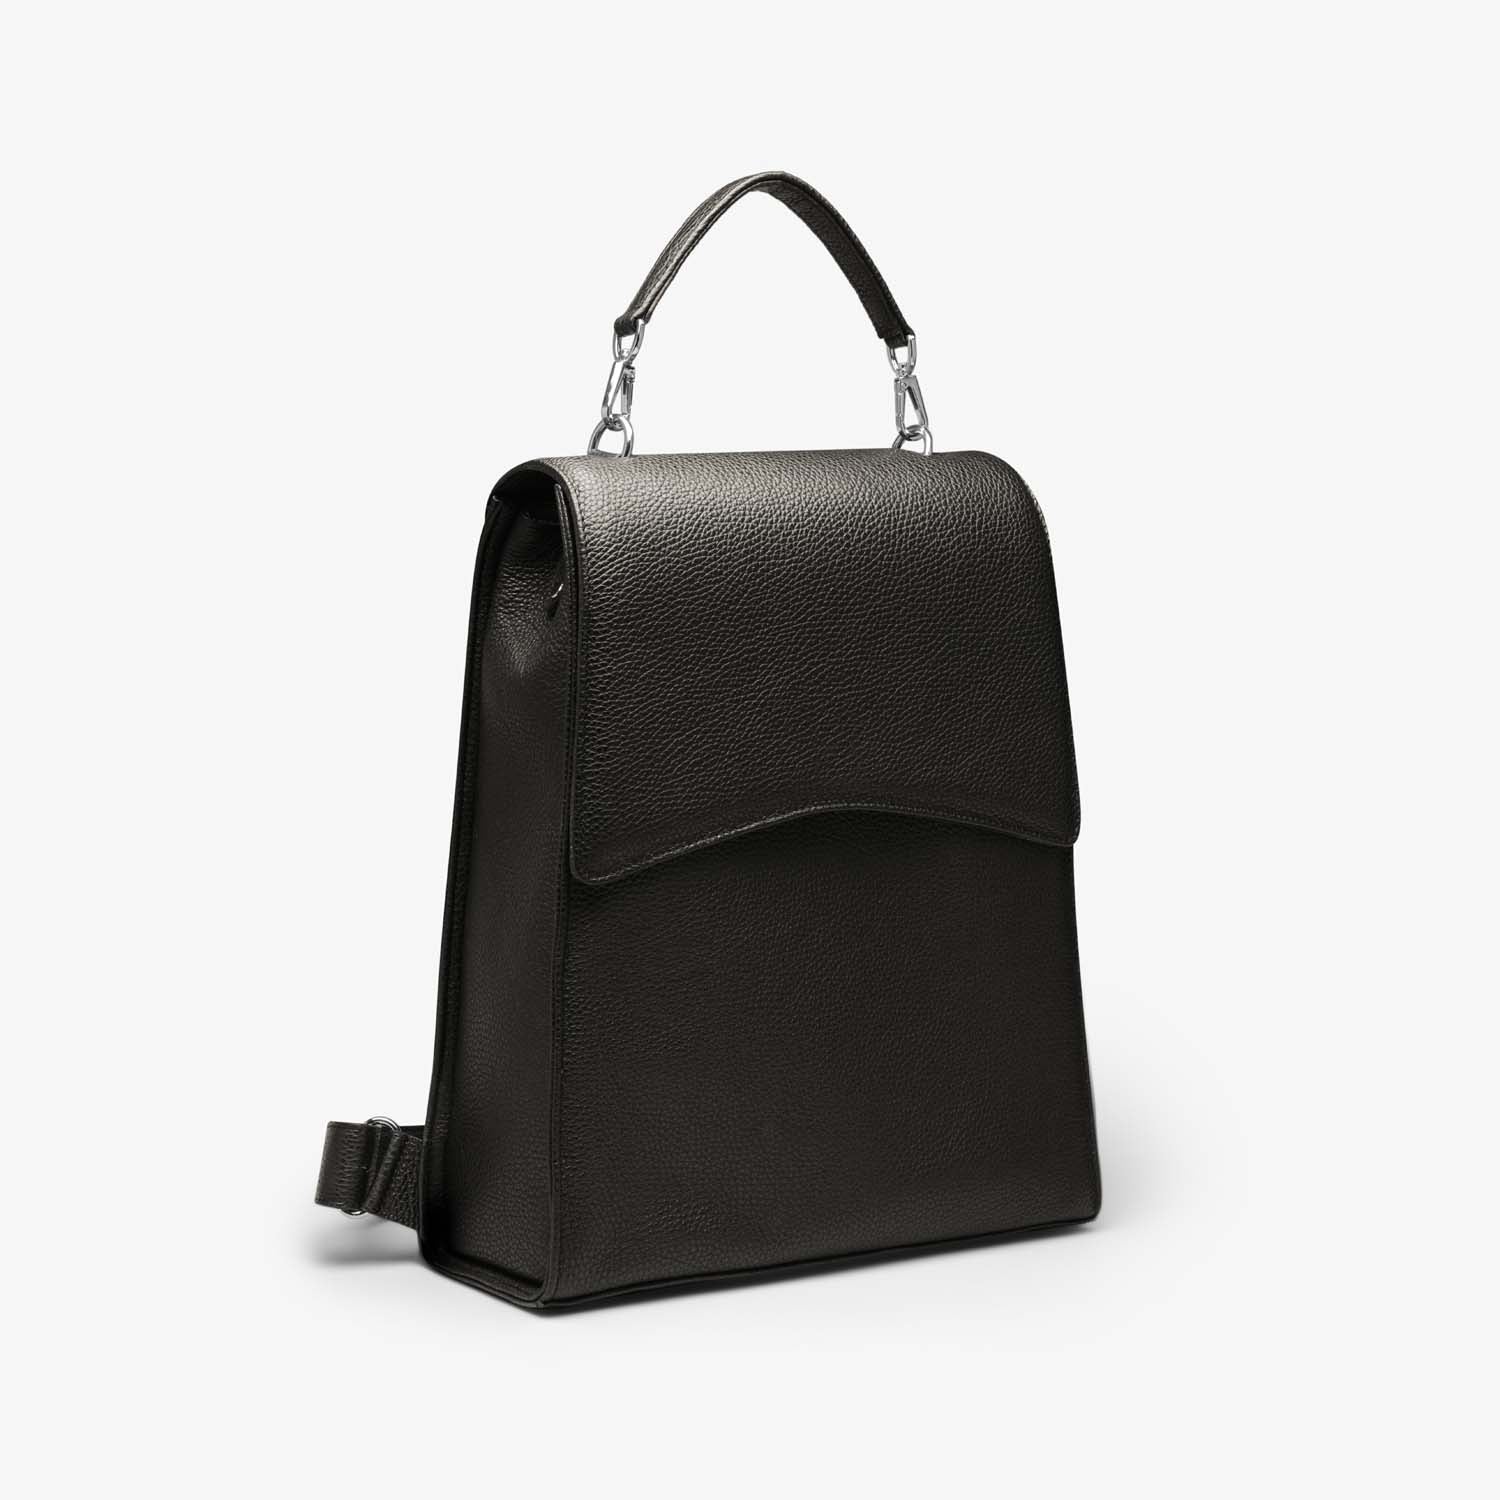 A black grained leather backpack with silver metalware. It has a detachable top handle and adjustable shoulder straps. It fits your laptop and other daily essentials.